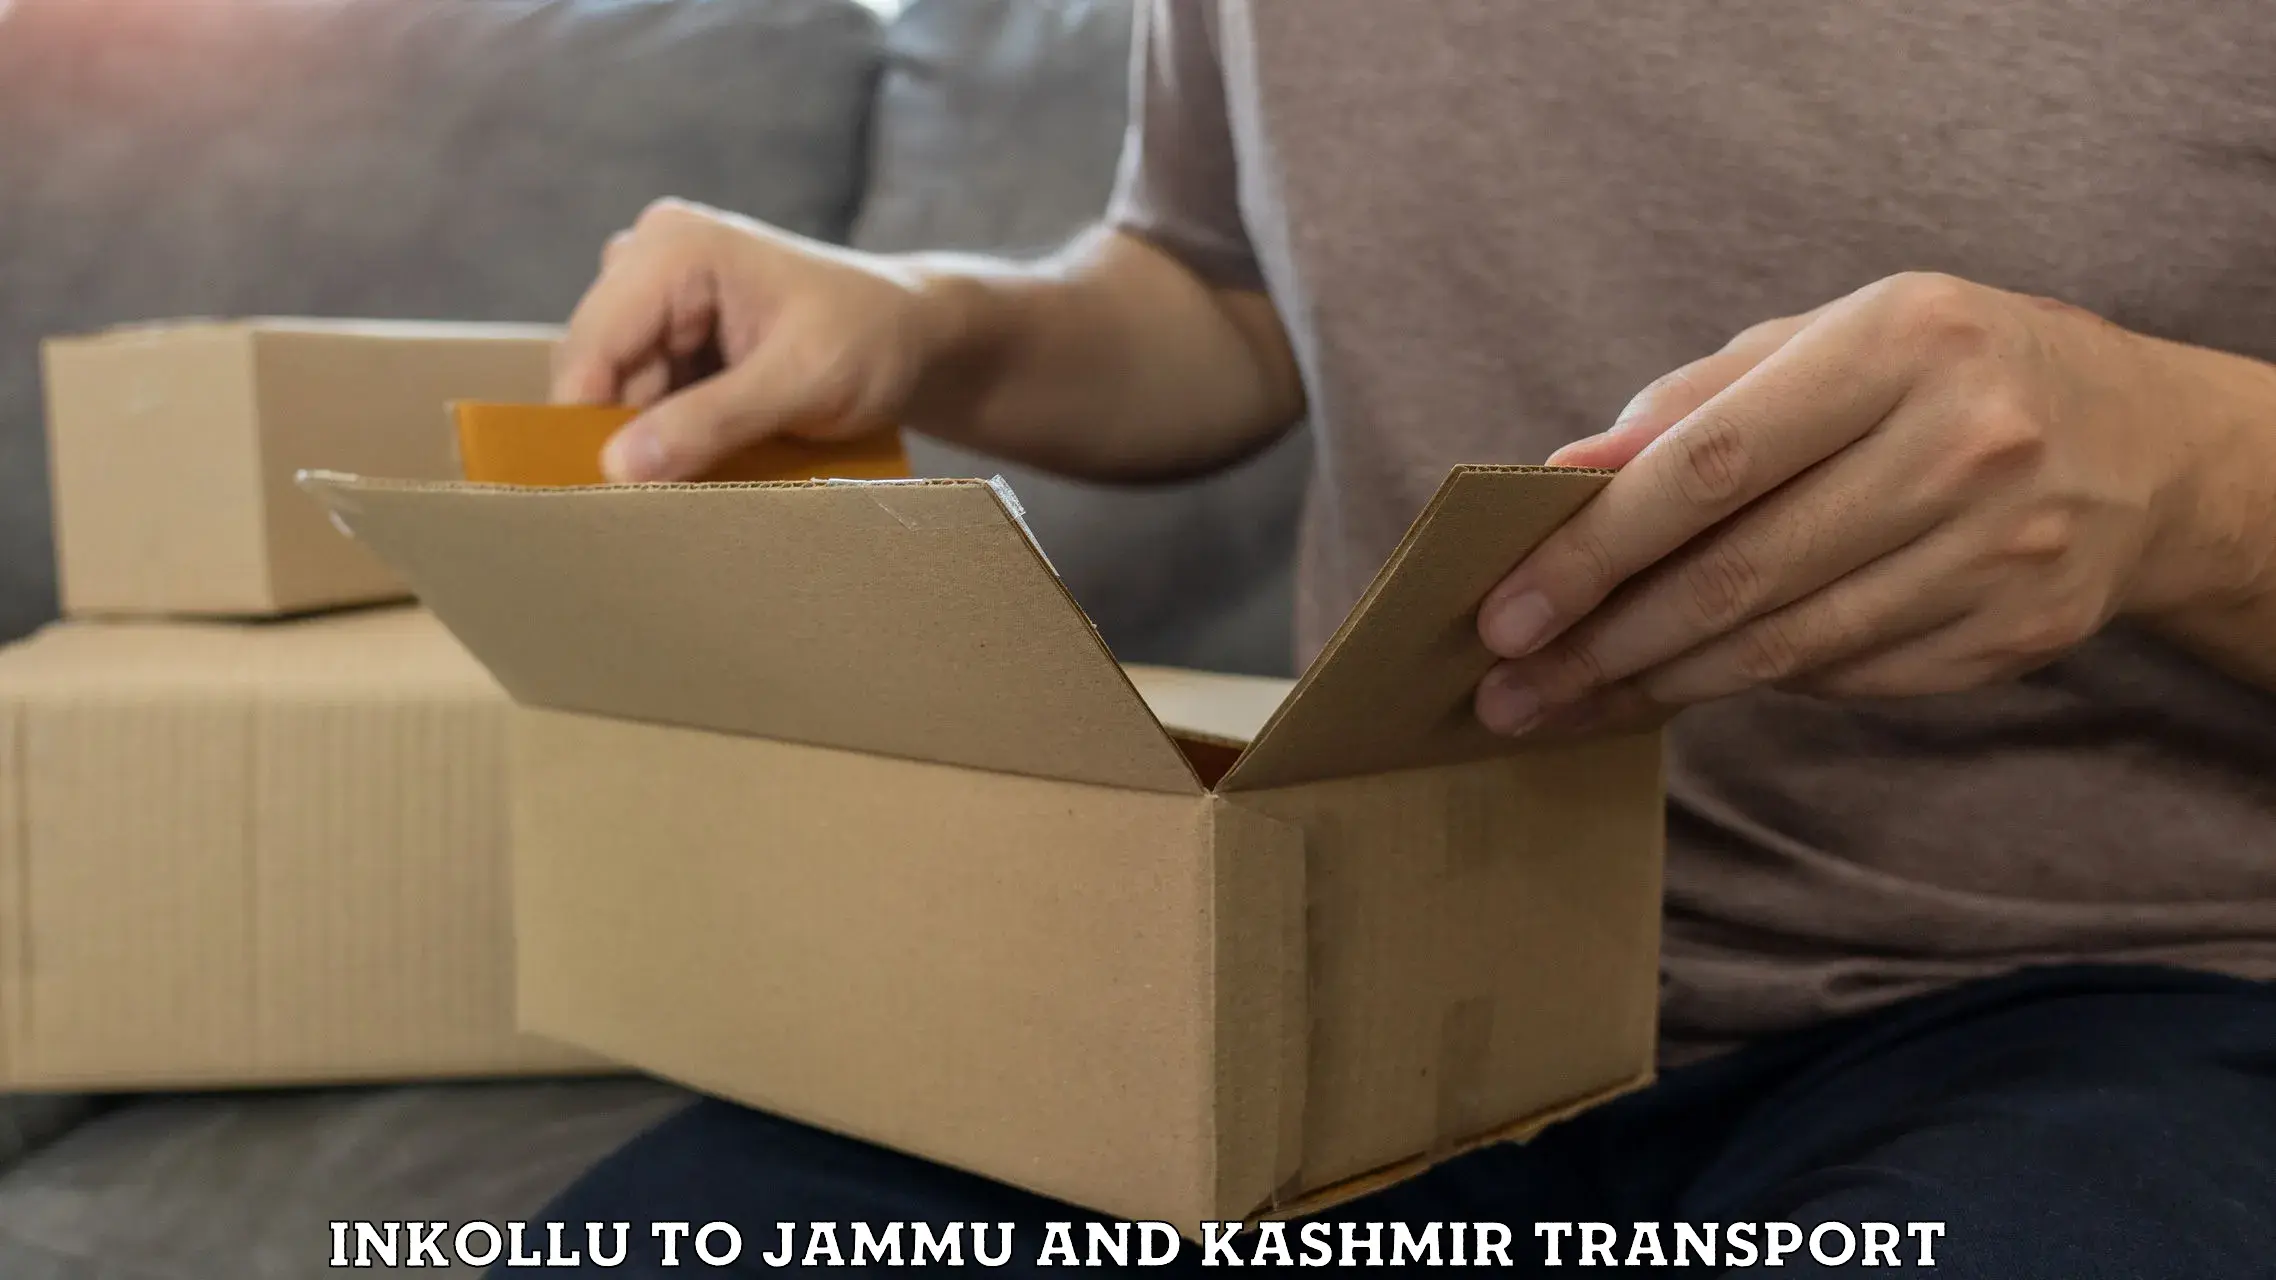 Transport bike from one state to another Inkollu to Jammu and Kashmir